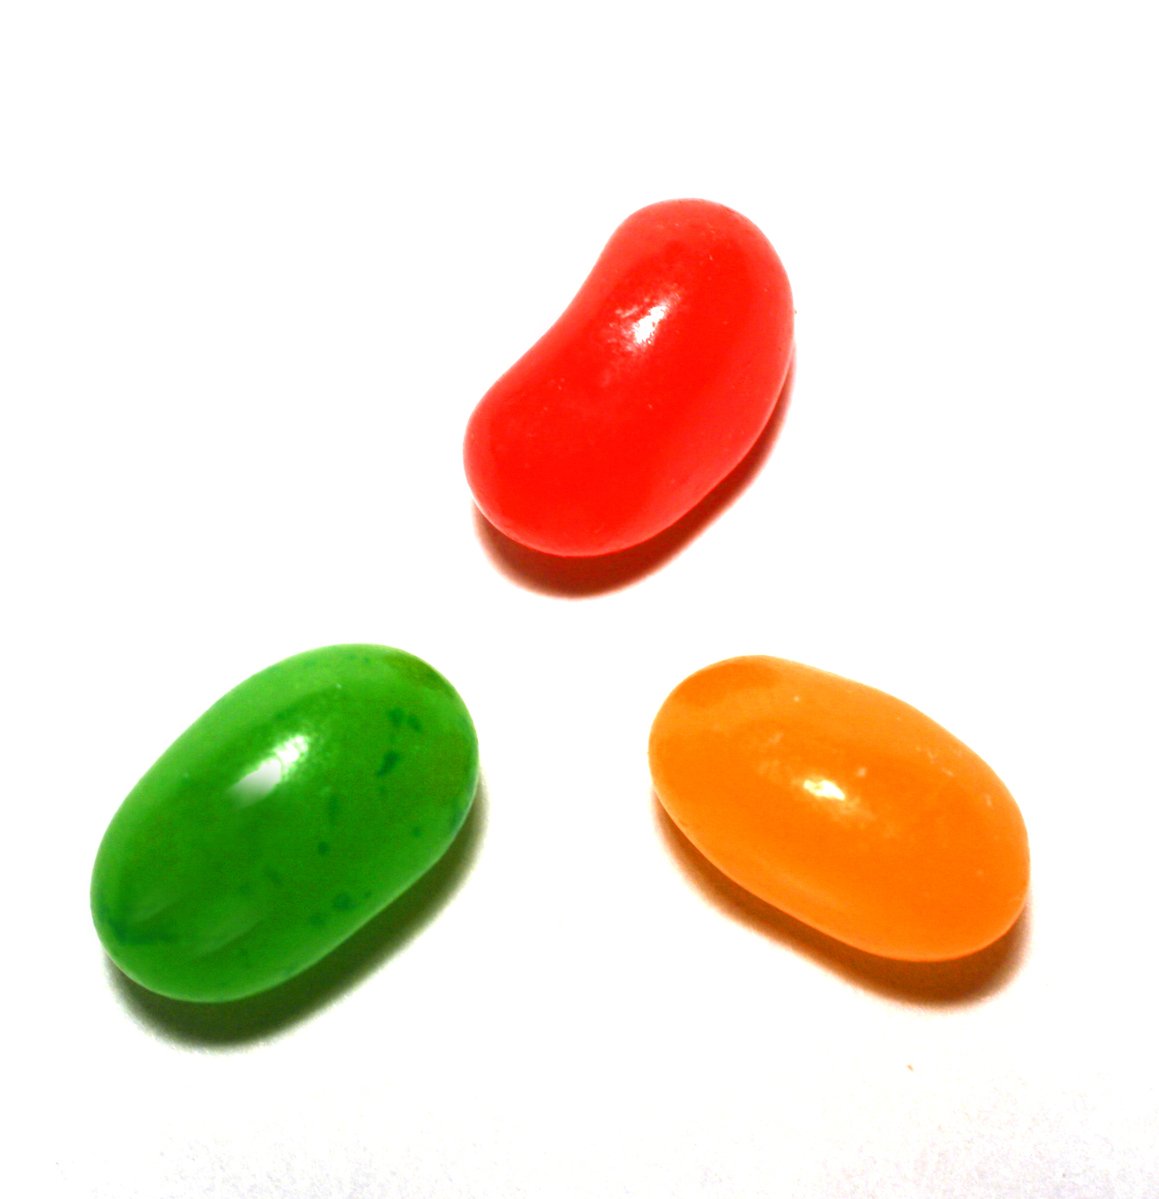 three different colors of jelly beans on a white surface